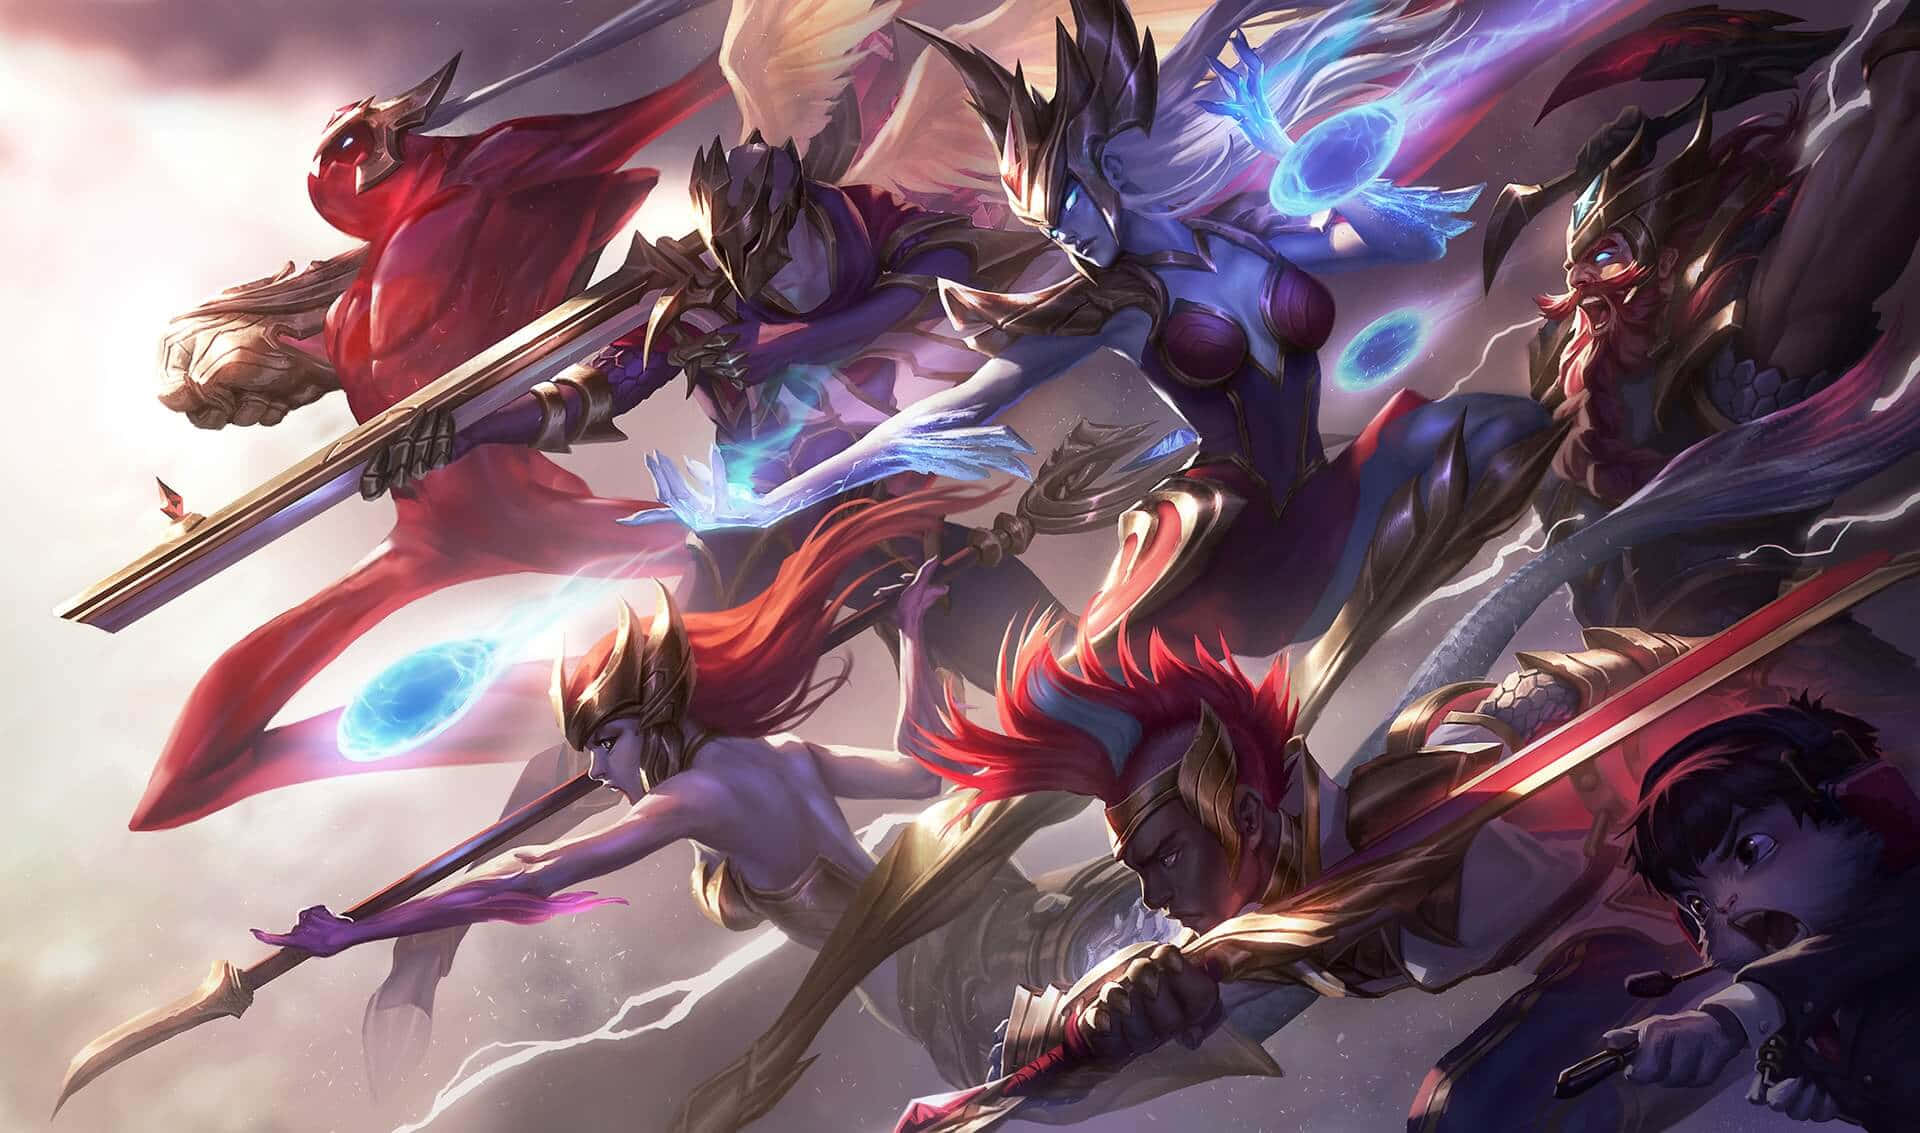 Dive Into the Heart of the Action with Best League of Legends